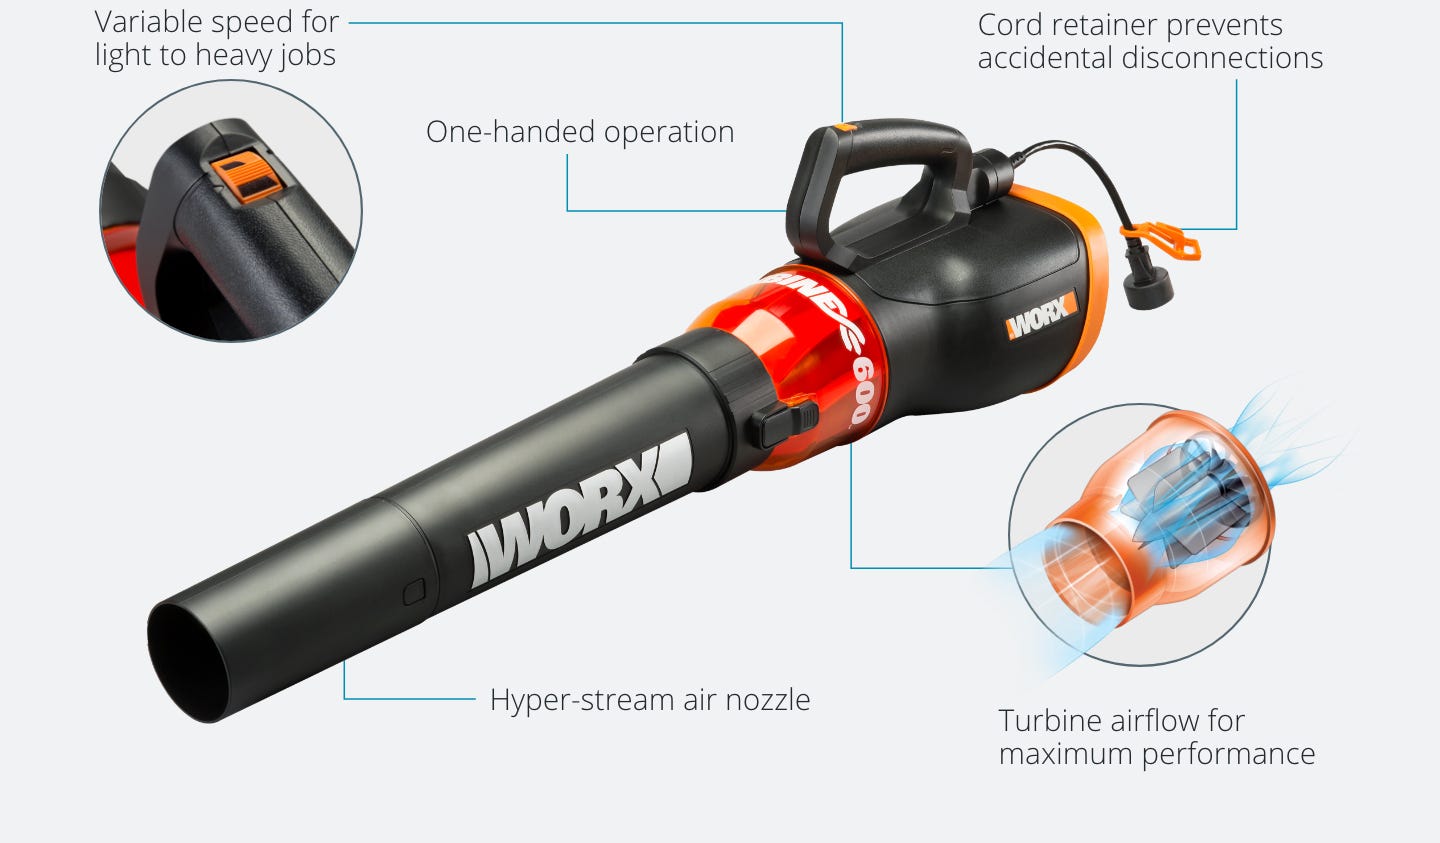 How to Disassemble Worx Leaf Blower